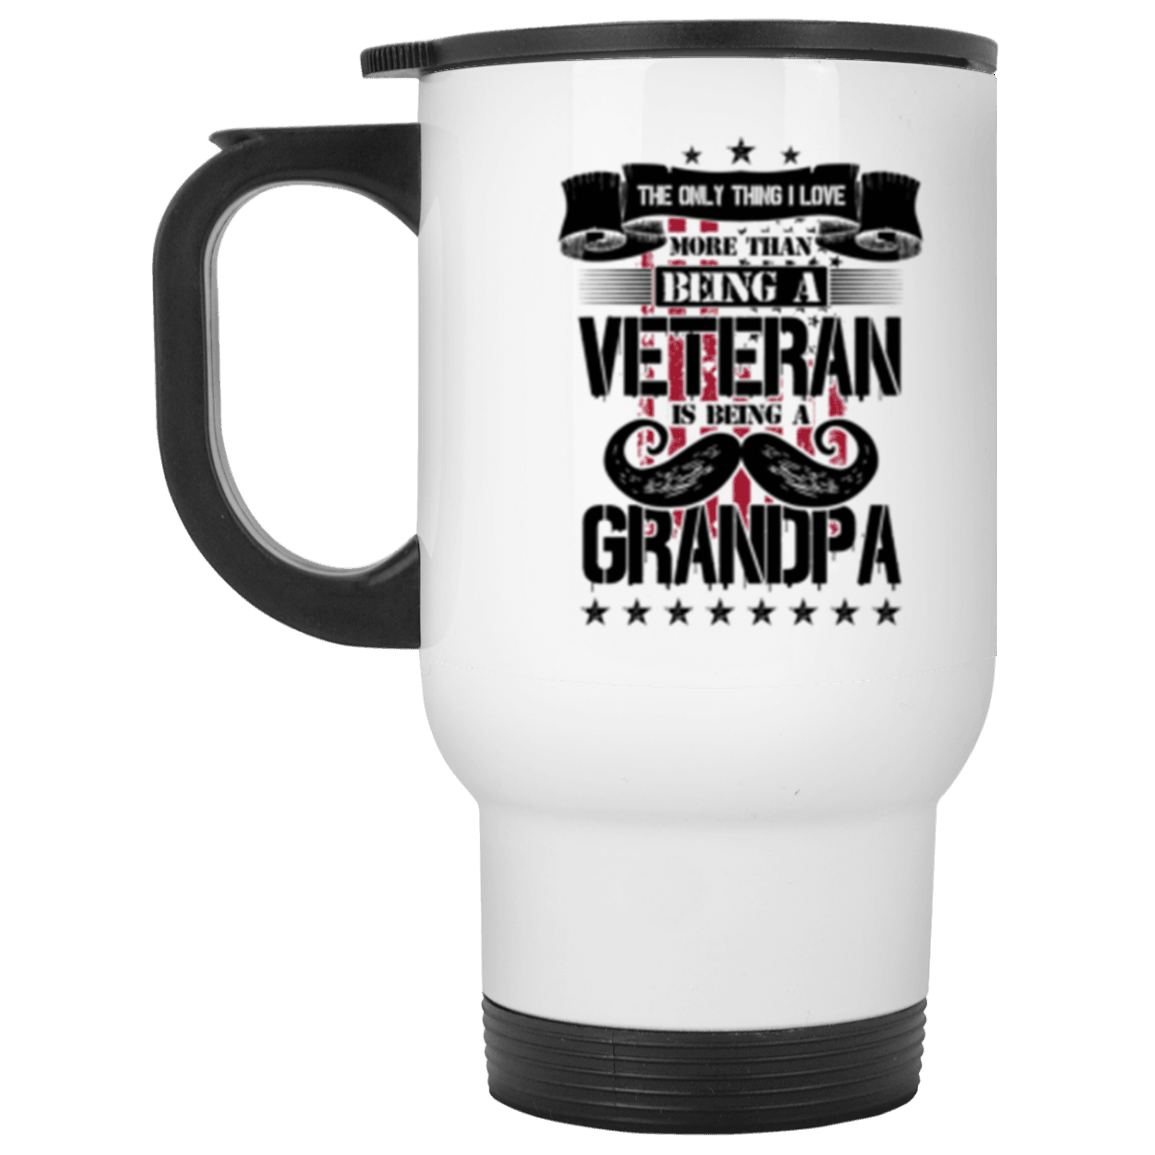 Designs by MyUtopia Shout Out:I Love Being a Veteran and a Grandpa 14oz Stainless Steel Travel Mug,White / 14 oz,Travel Mug